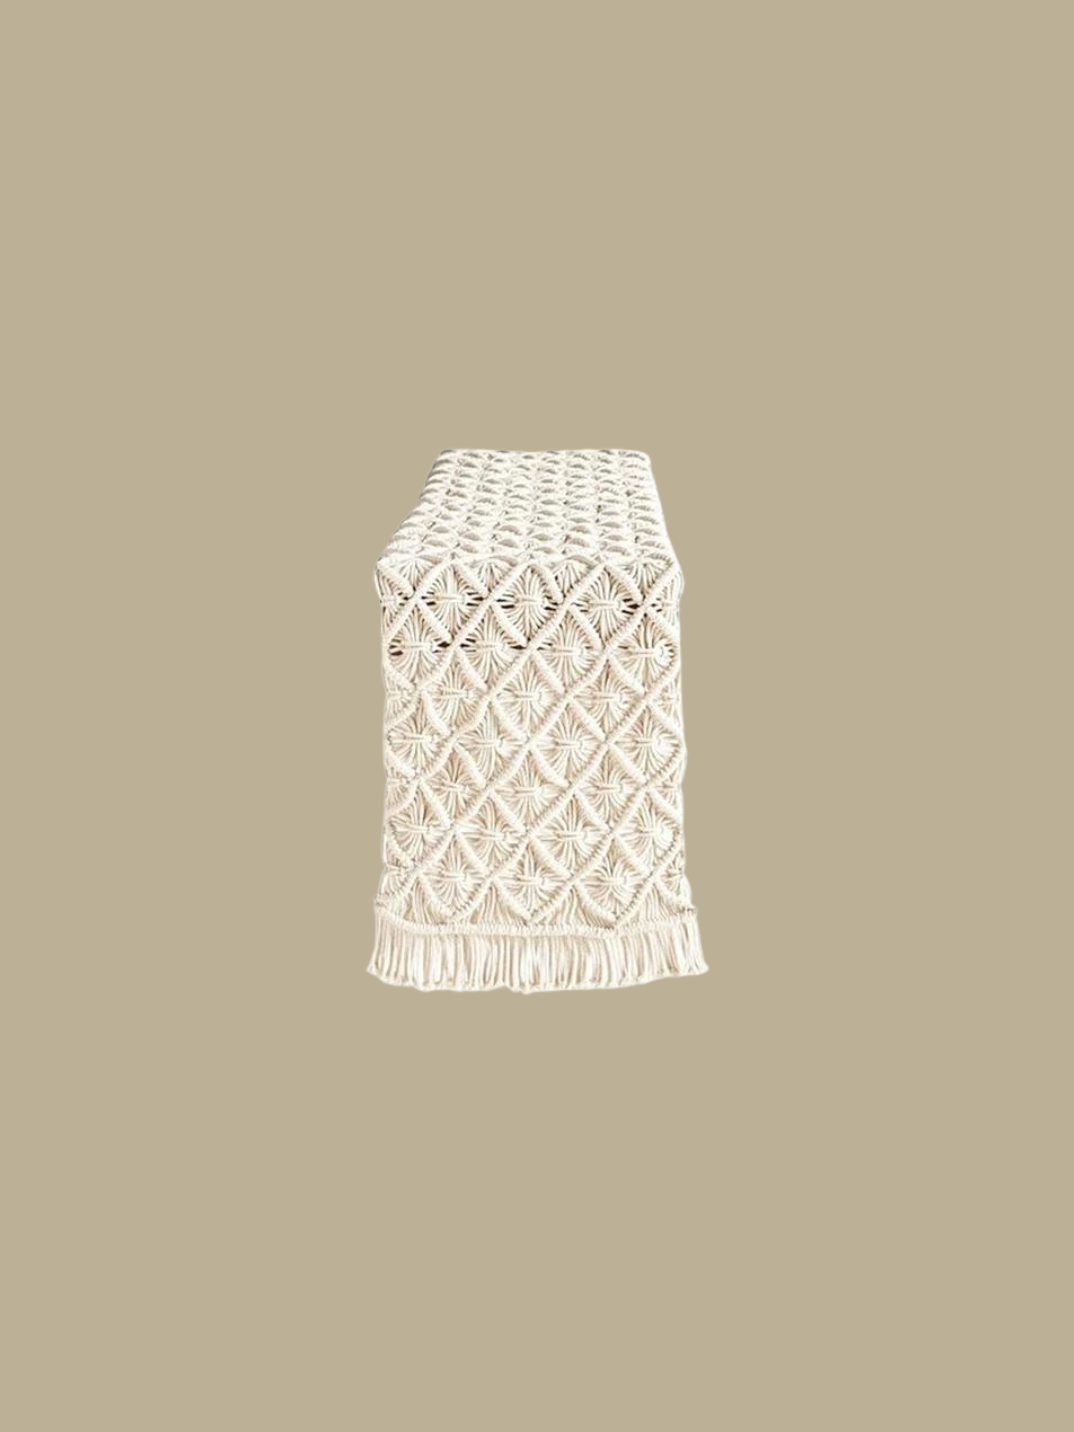 checkered pattern macrame table runner made in India eco-friendly tableware made in India shop sustainable